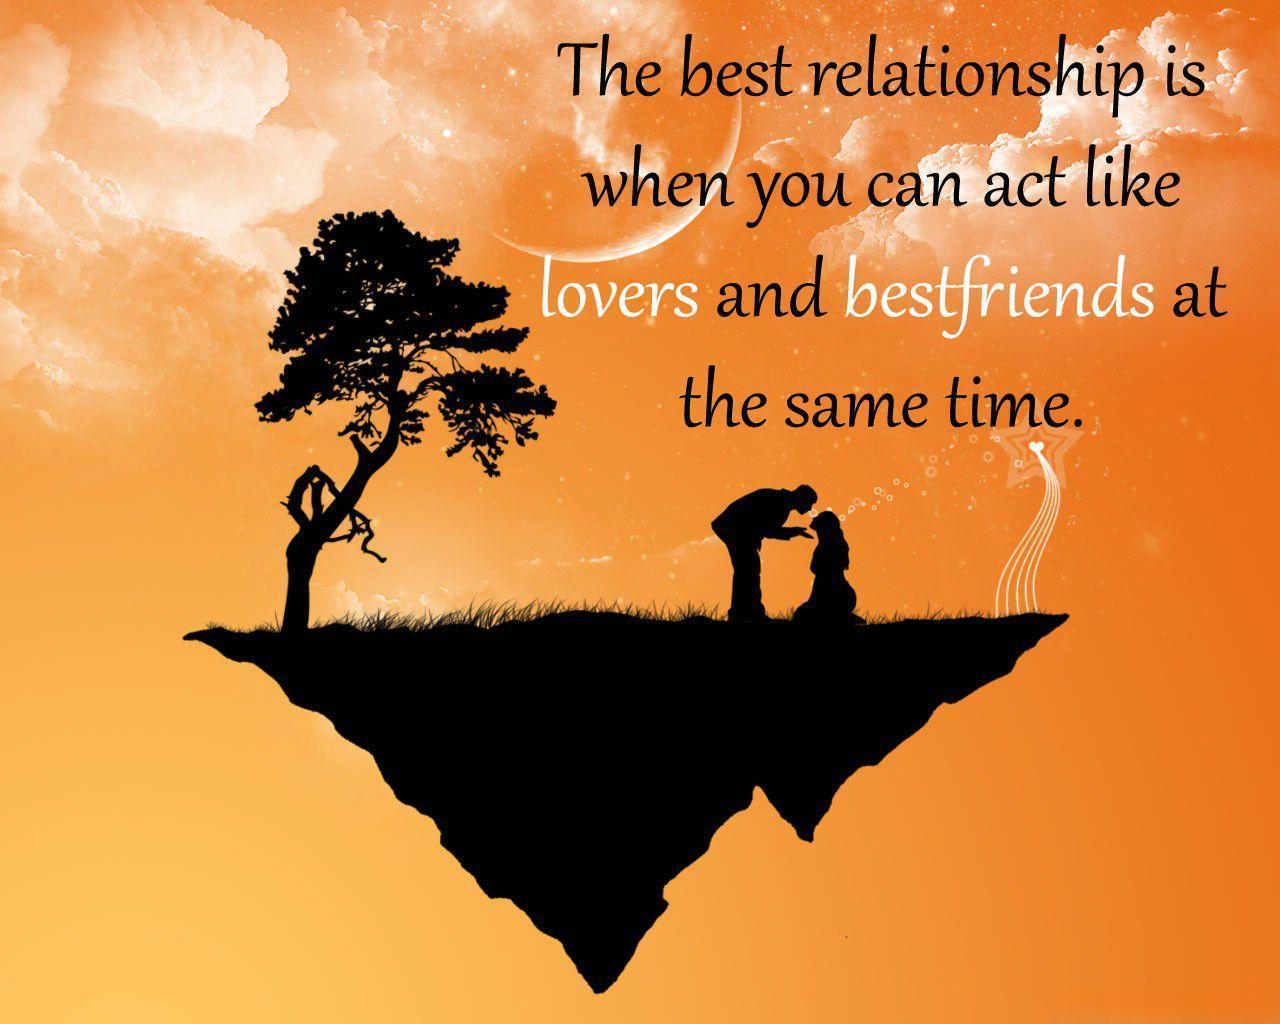 Love Relationship Tips. Relationship HD Love 1280x1024px